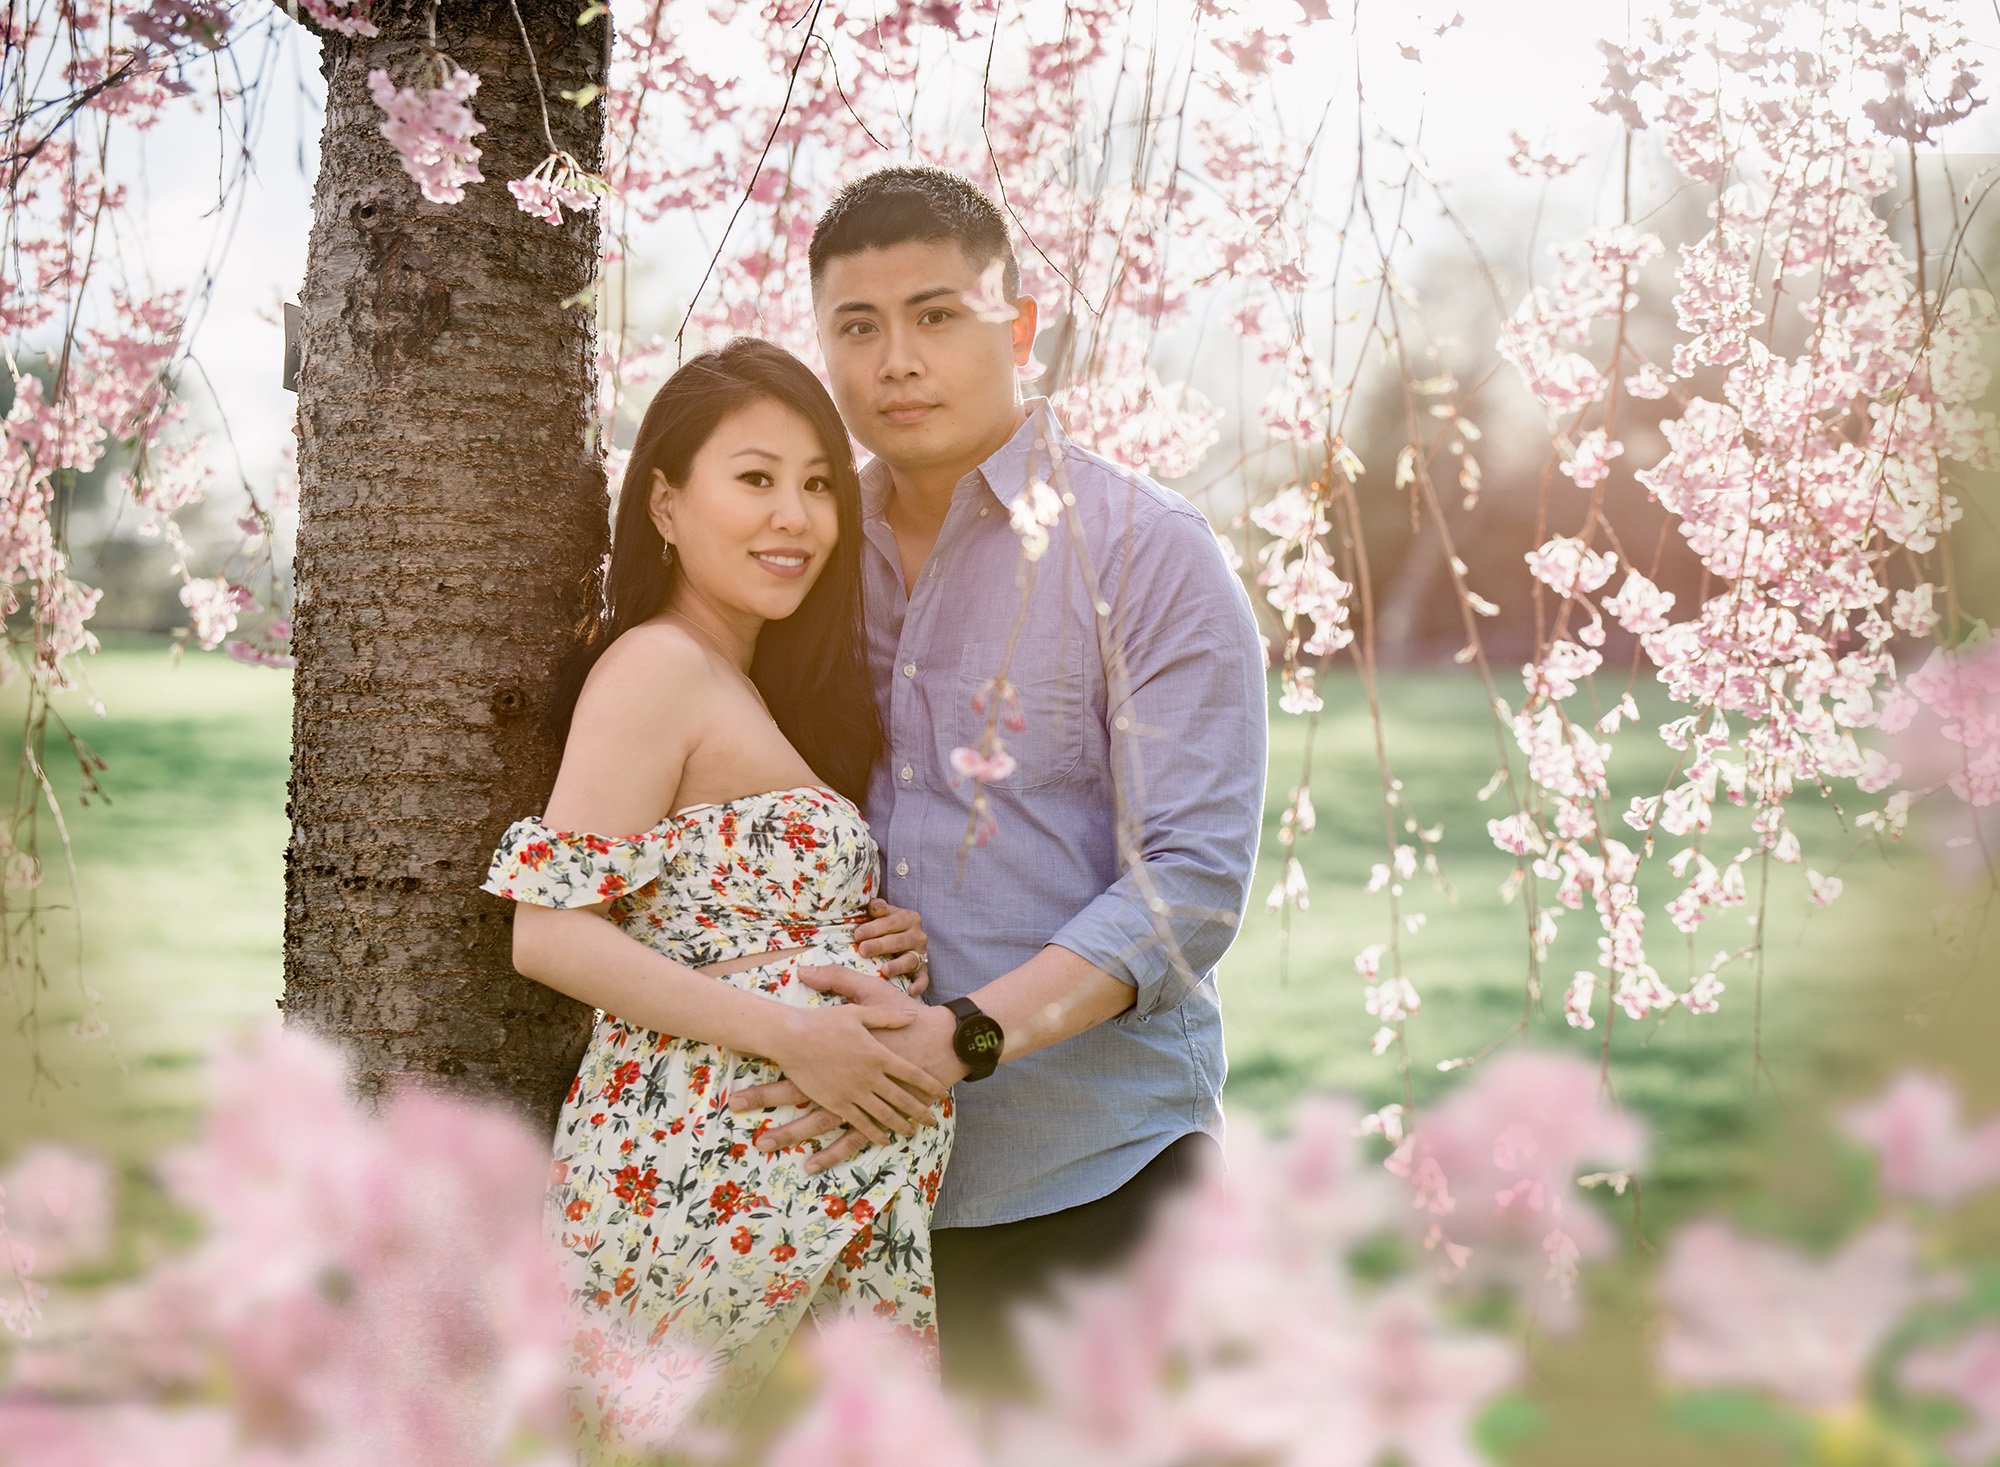 garden flower maternity photos pregnant woman in floral maternity dress posing with partner under a weeping cherry tree